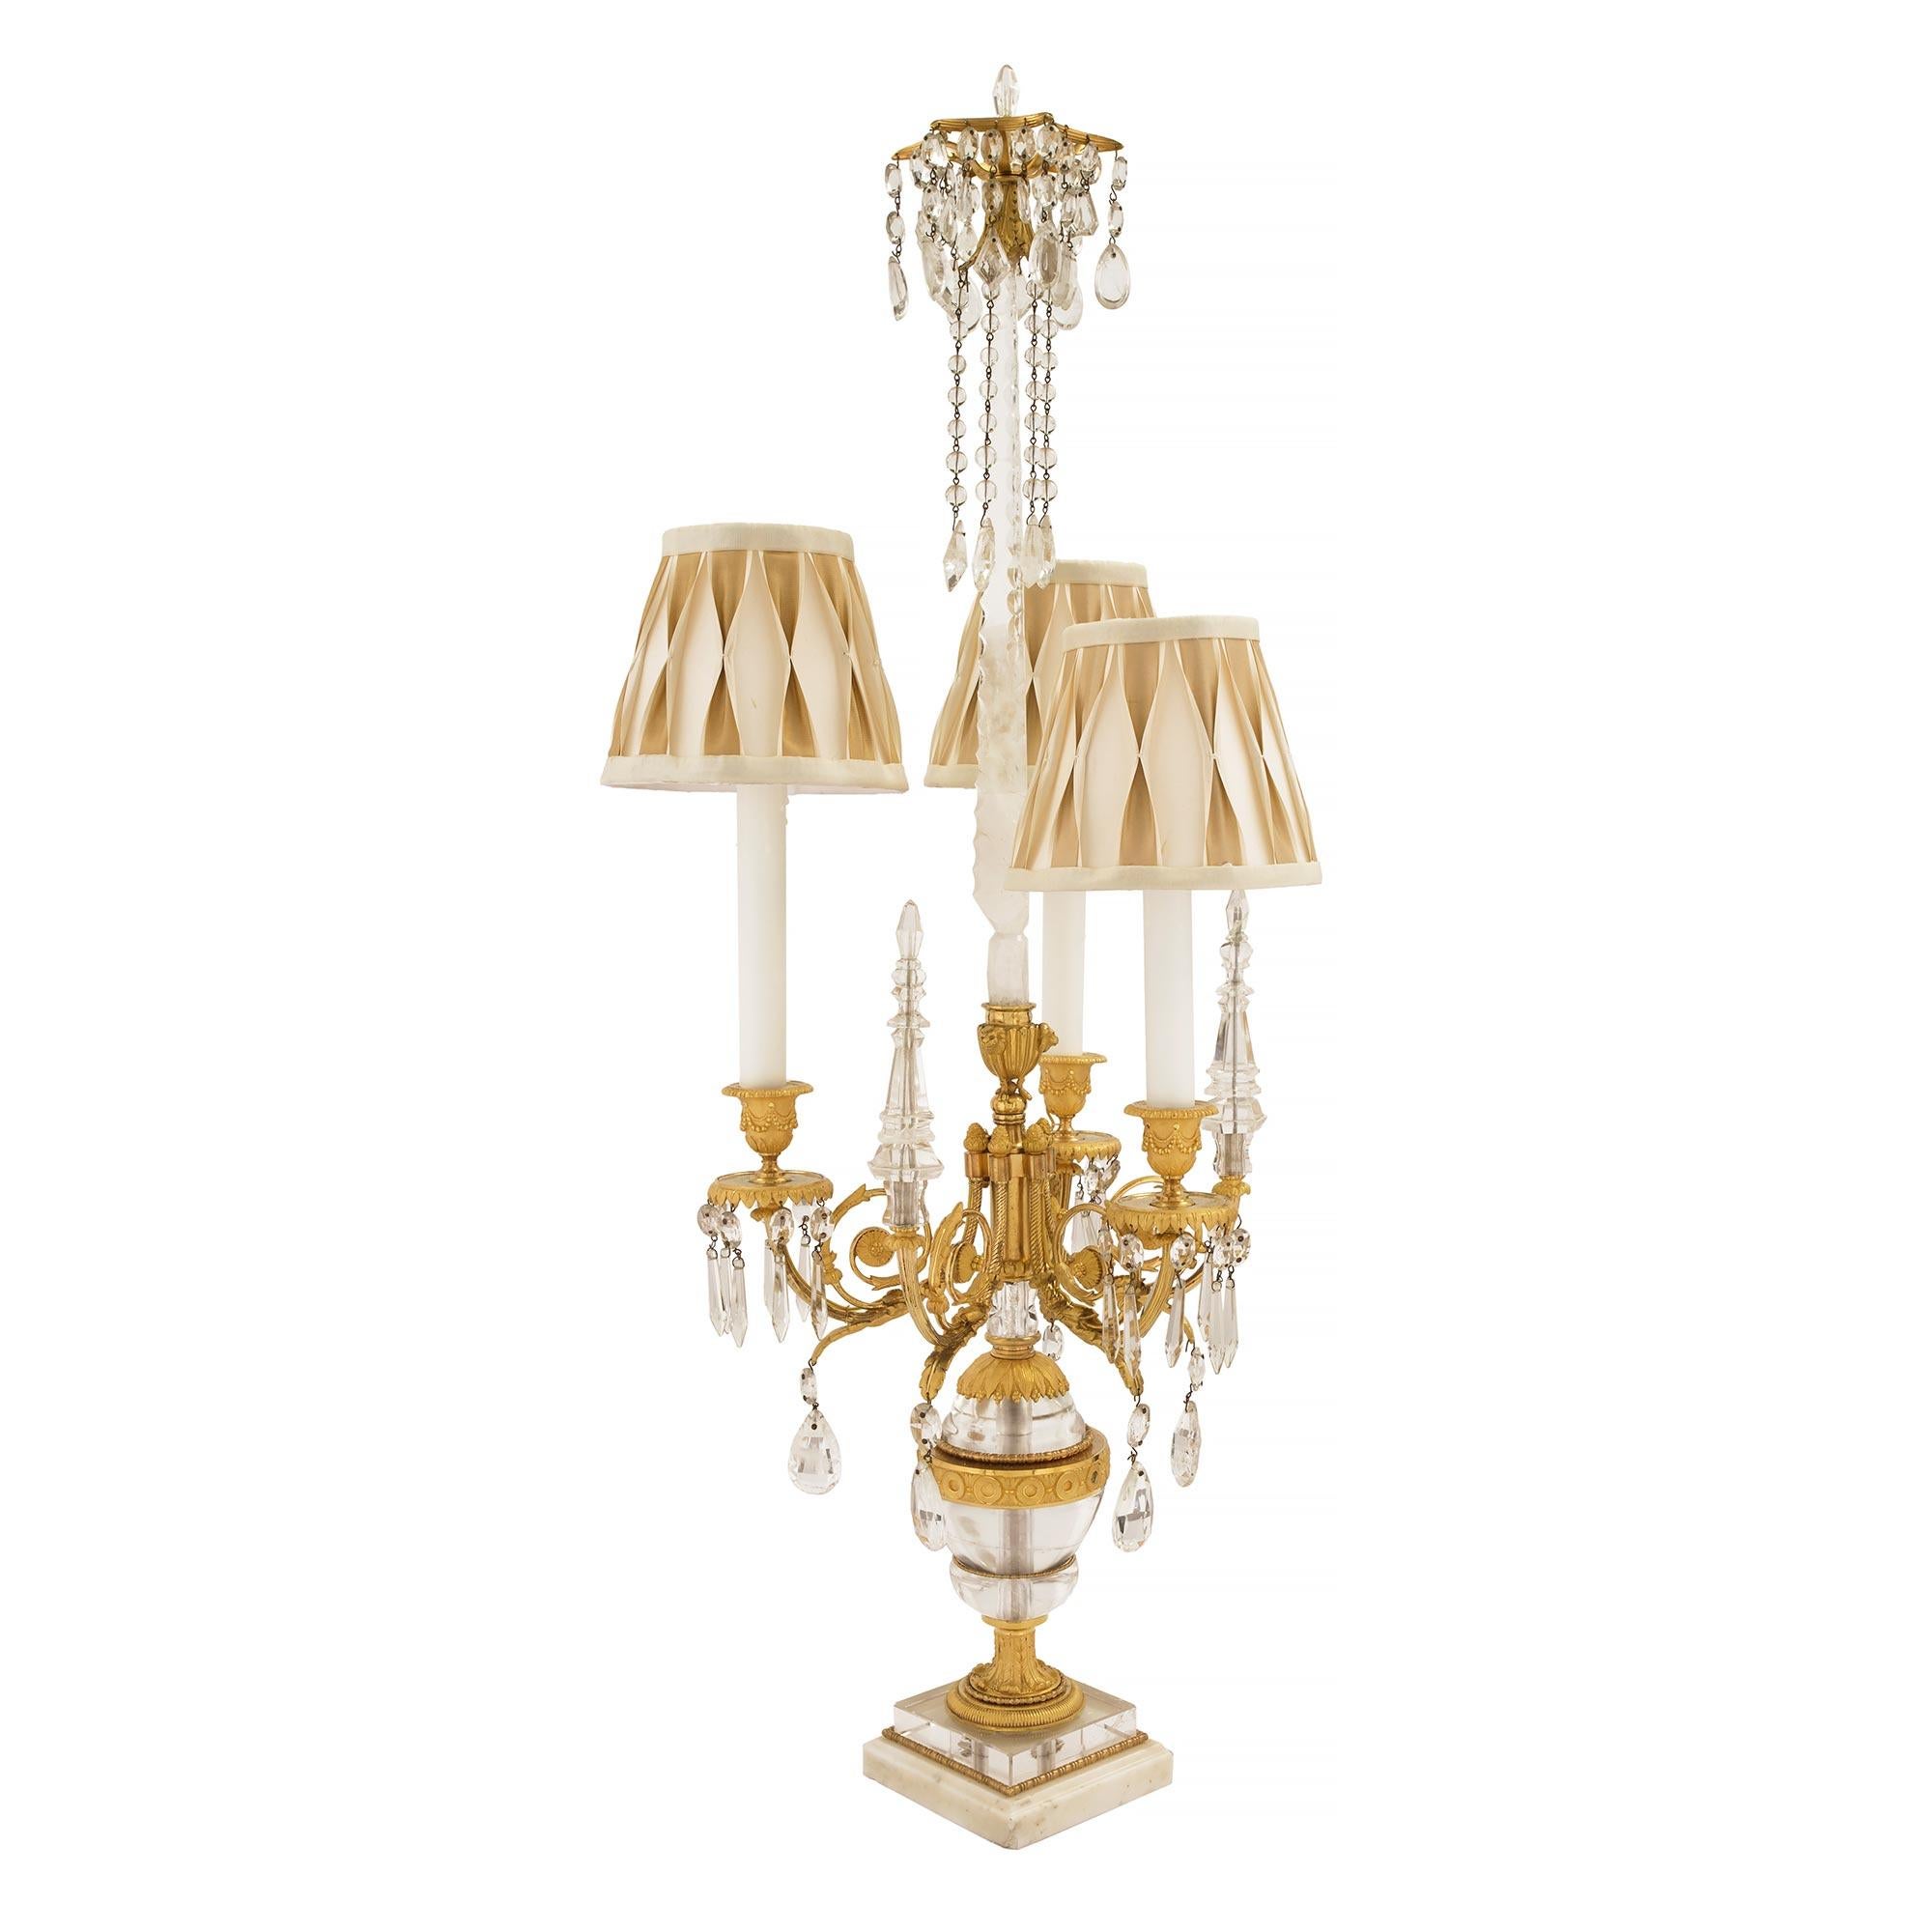 A sensational pair of French 19th century Louis XVI st. rock crystal, Baccarat crystal and ormolu candelabra lamps. Each lamp is raised by a square white Carrara marble base with a mottled border and a rock crystal support framed within a charming